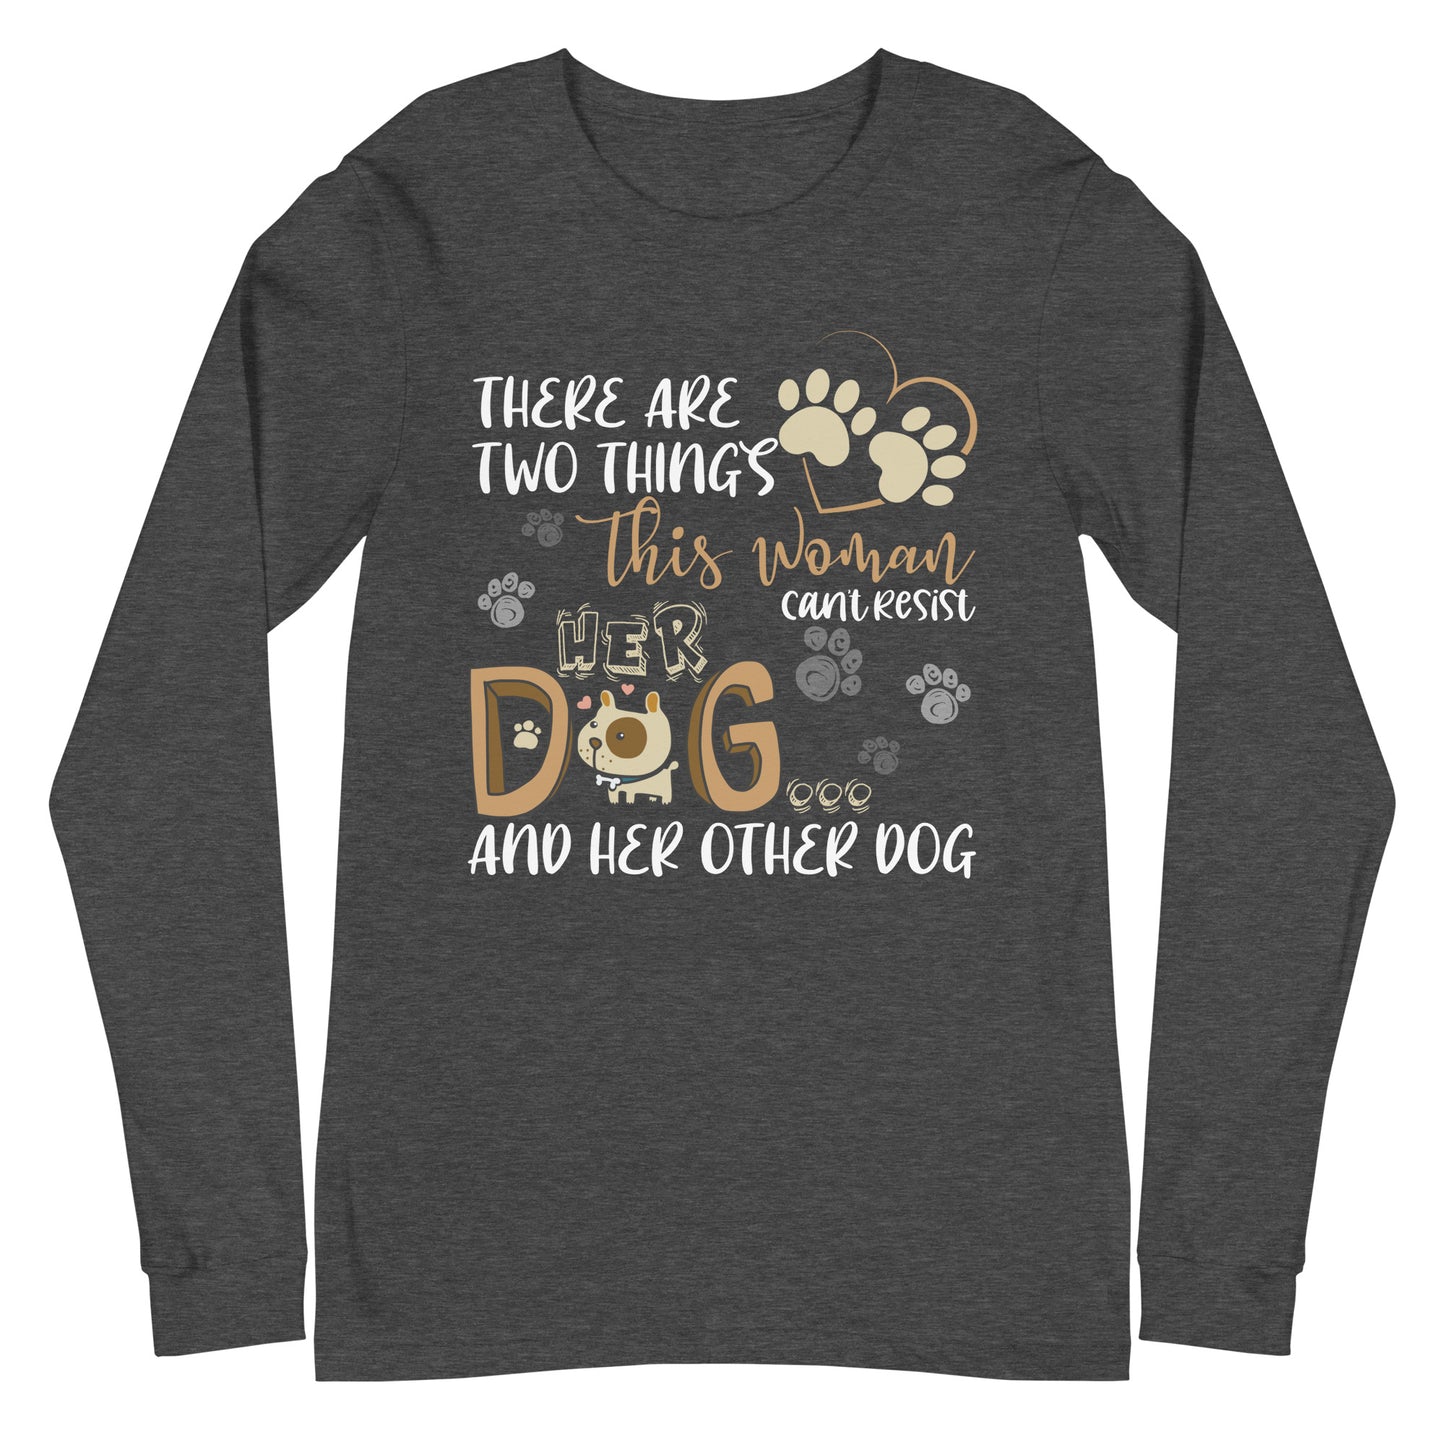 There are Two Things Her Dog and Her Other Dog Long Tee